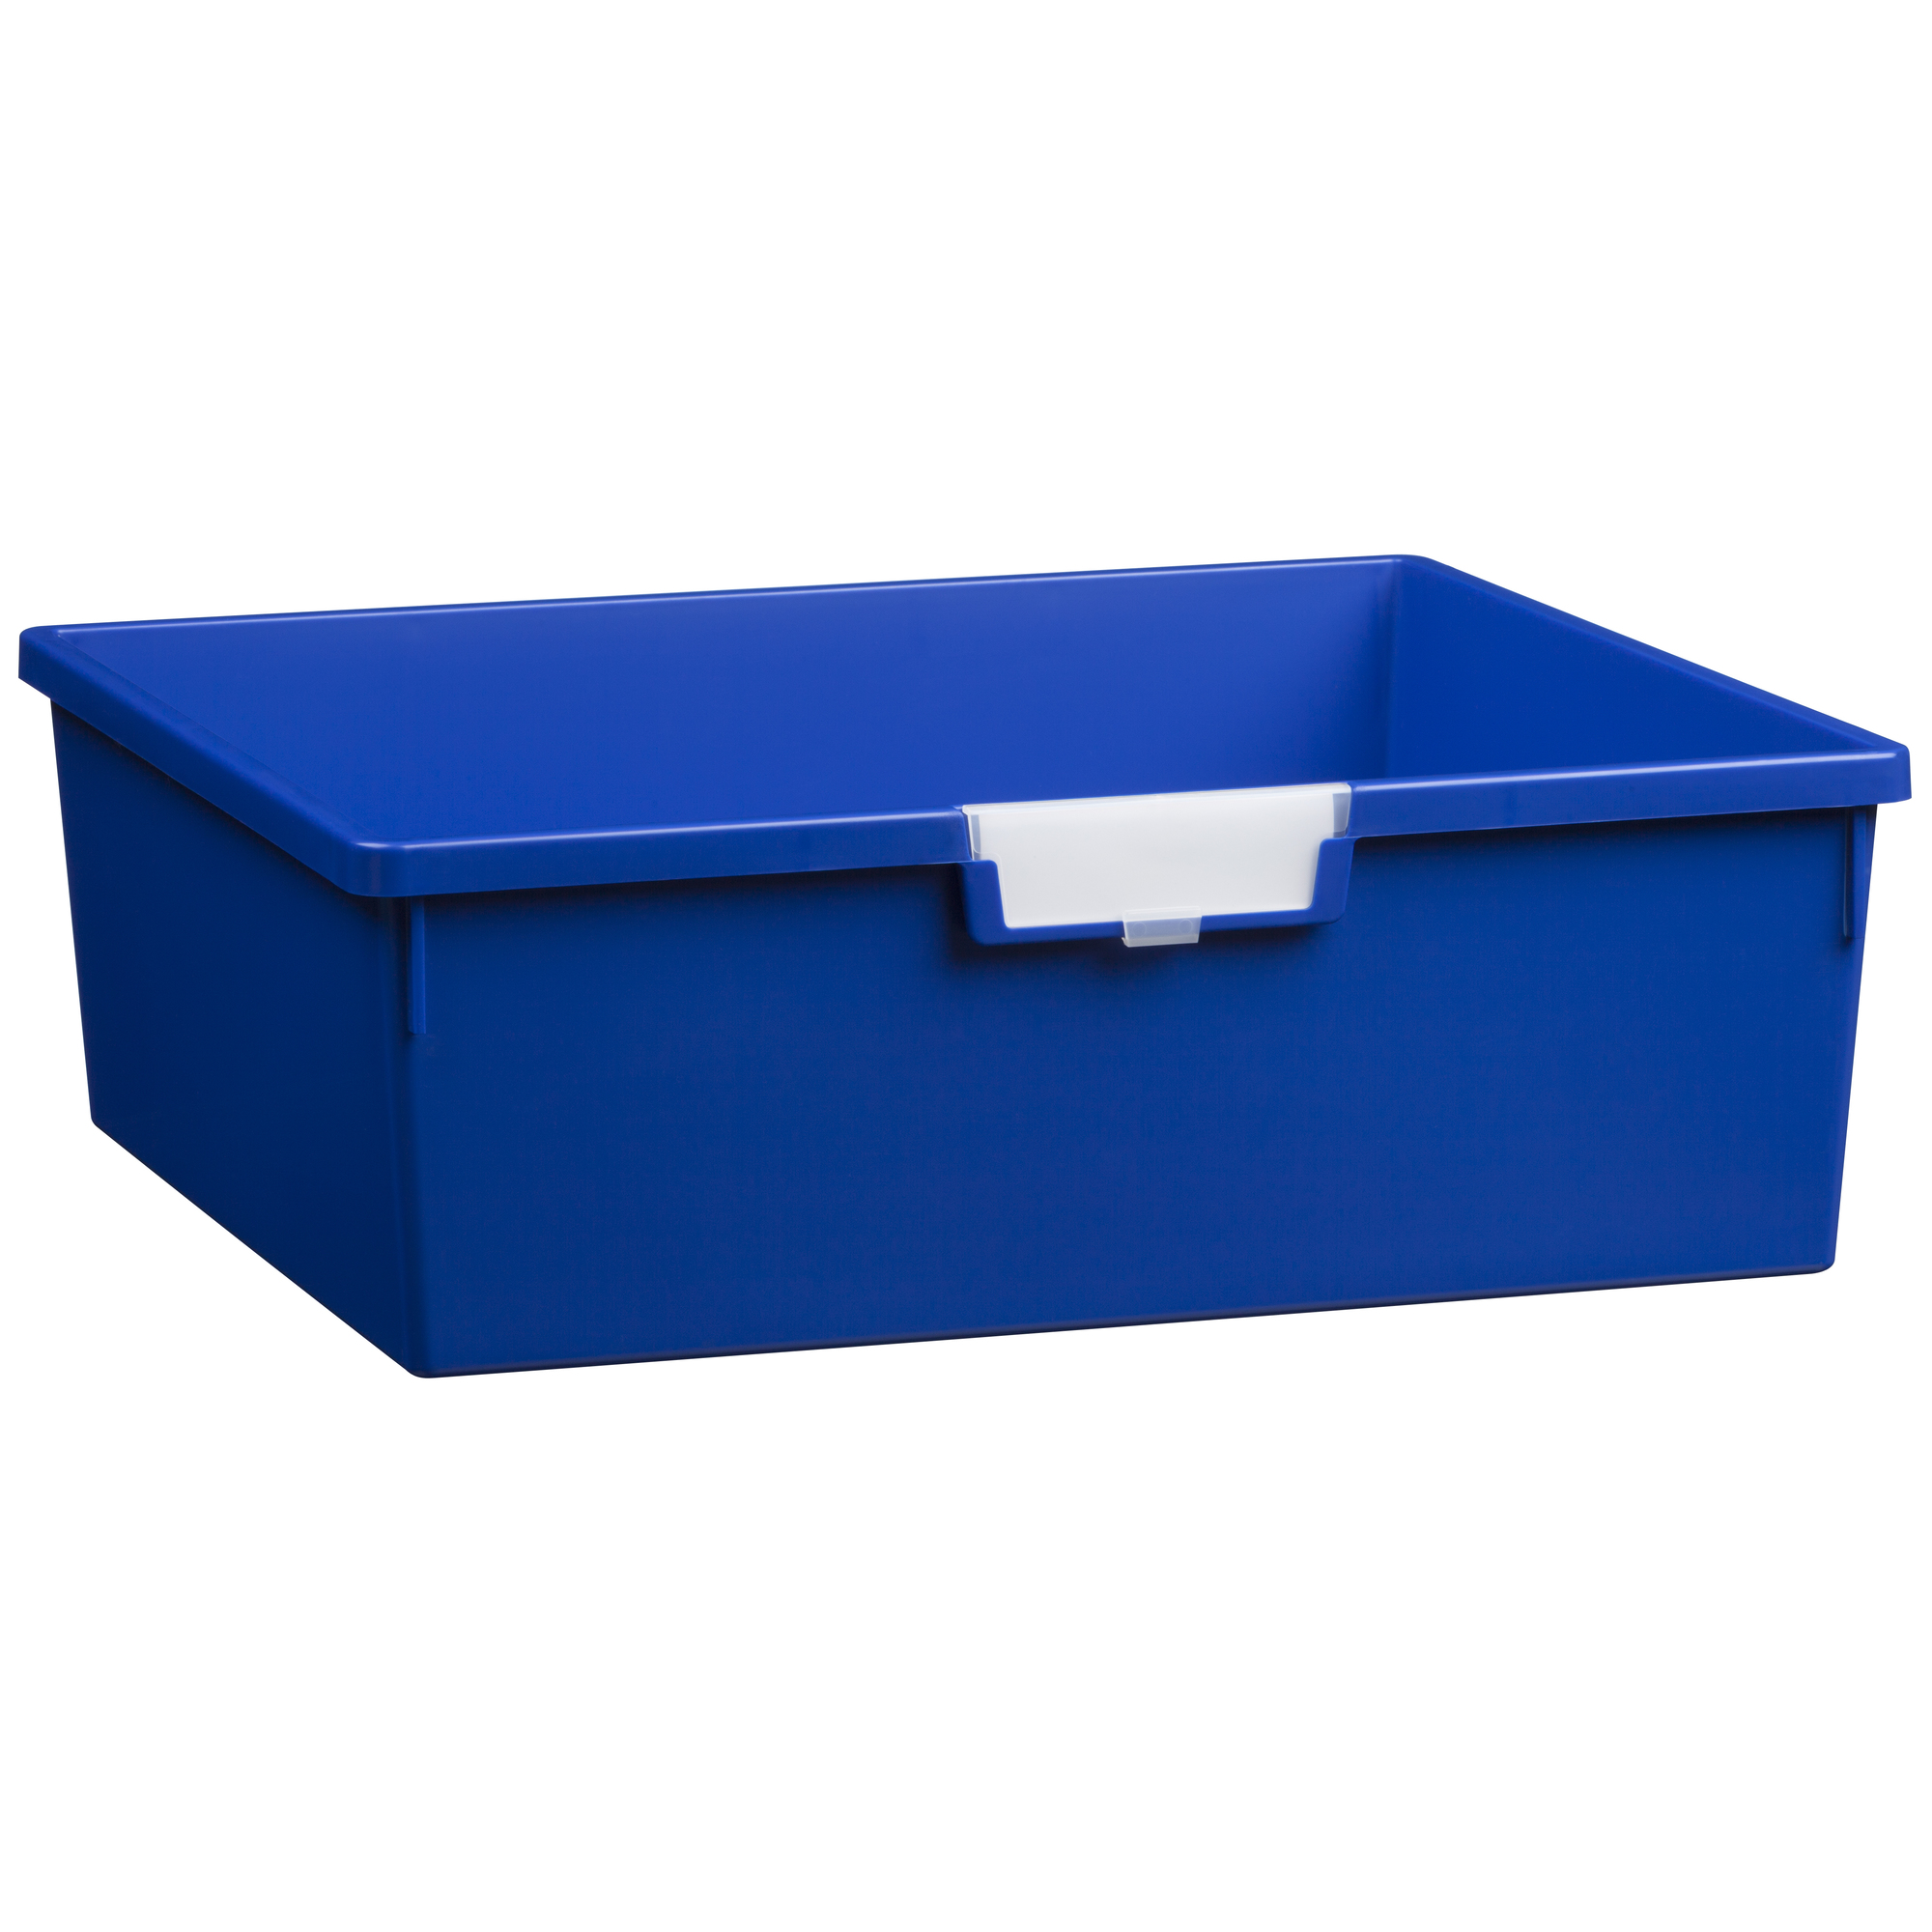 Certwood StorWerks, Wide Line 6Inch Tray in Primary Blue-1PK, Included (qty.) 1, Material Plastic, Height 6 in, Model CE1958PB1